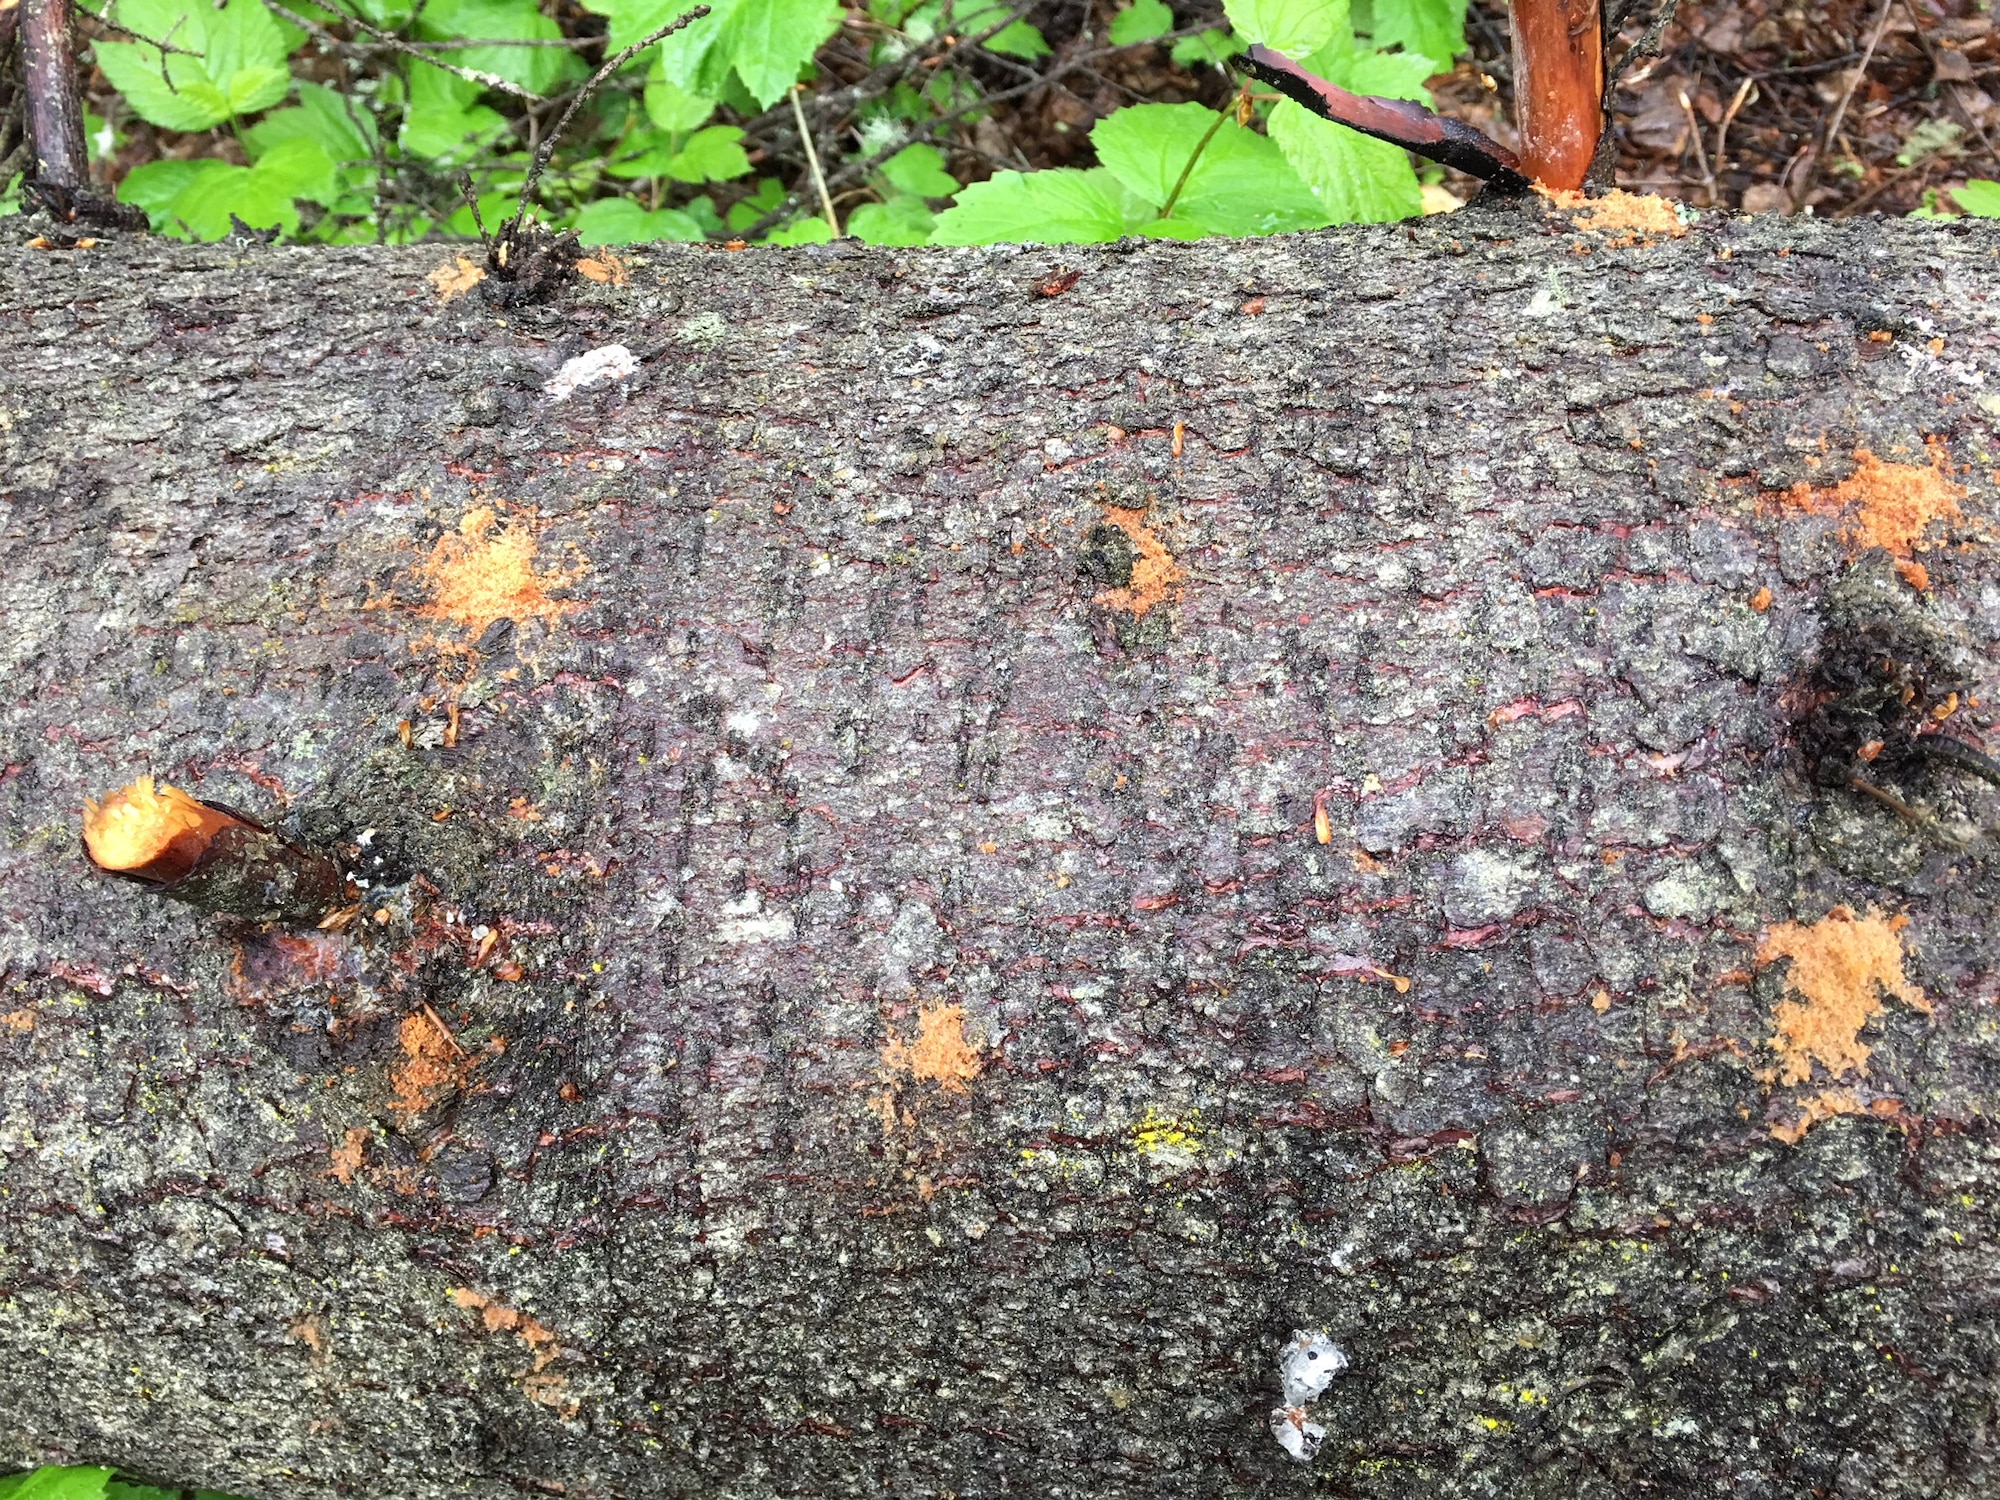 Spruce bark beetle dung, called frass, or “sawdust,” marks where a spruce bark beetle has burrowed under the bark of a spruce tree at Joint Base Elmendorf-Richardson, Alaska, June 6, 2018. Spruce bark beetles are attacking Alaska’s spruce tree population from the Kenai Peninsula to the Matanuska Valley and JBER. In the past 35 years, spruce beetle outbreaks have resulted in the loss of an estimated three billion board feet of timber in Alaska.